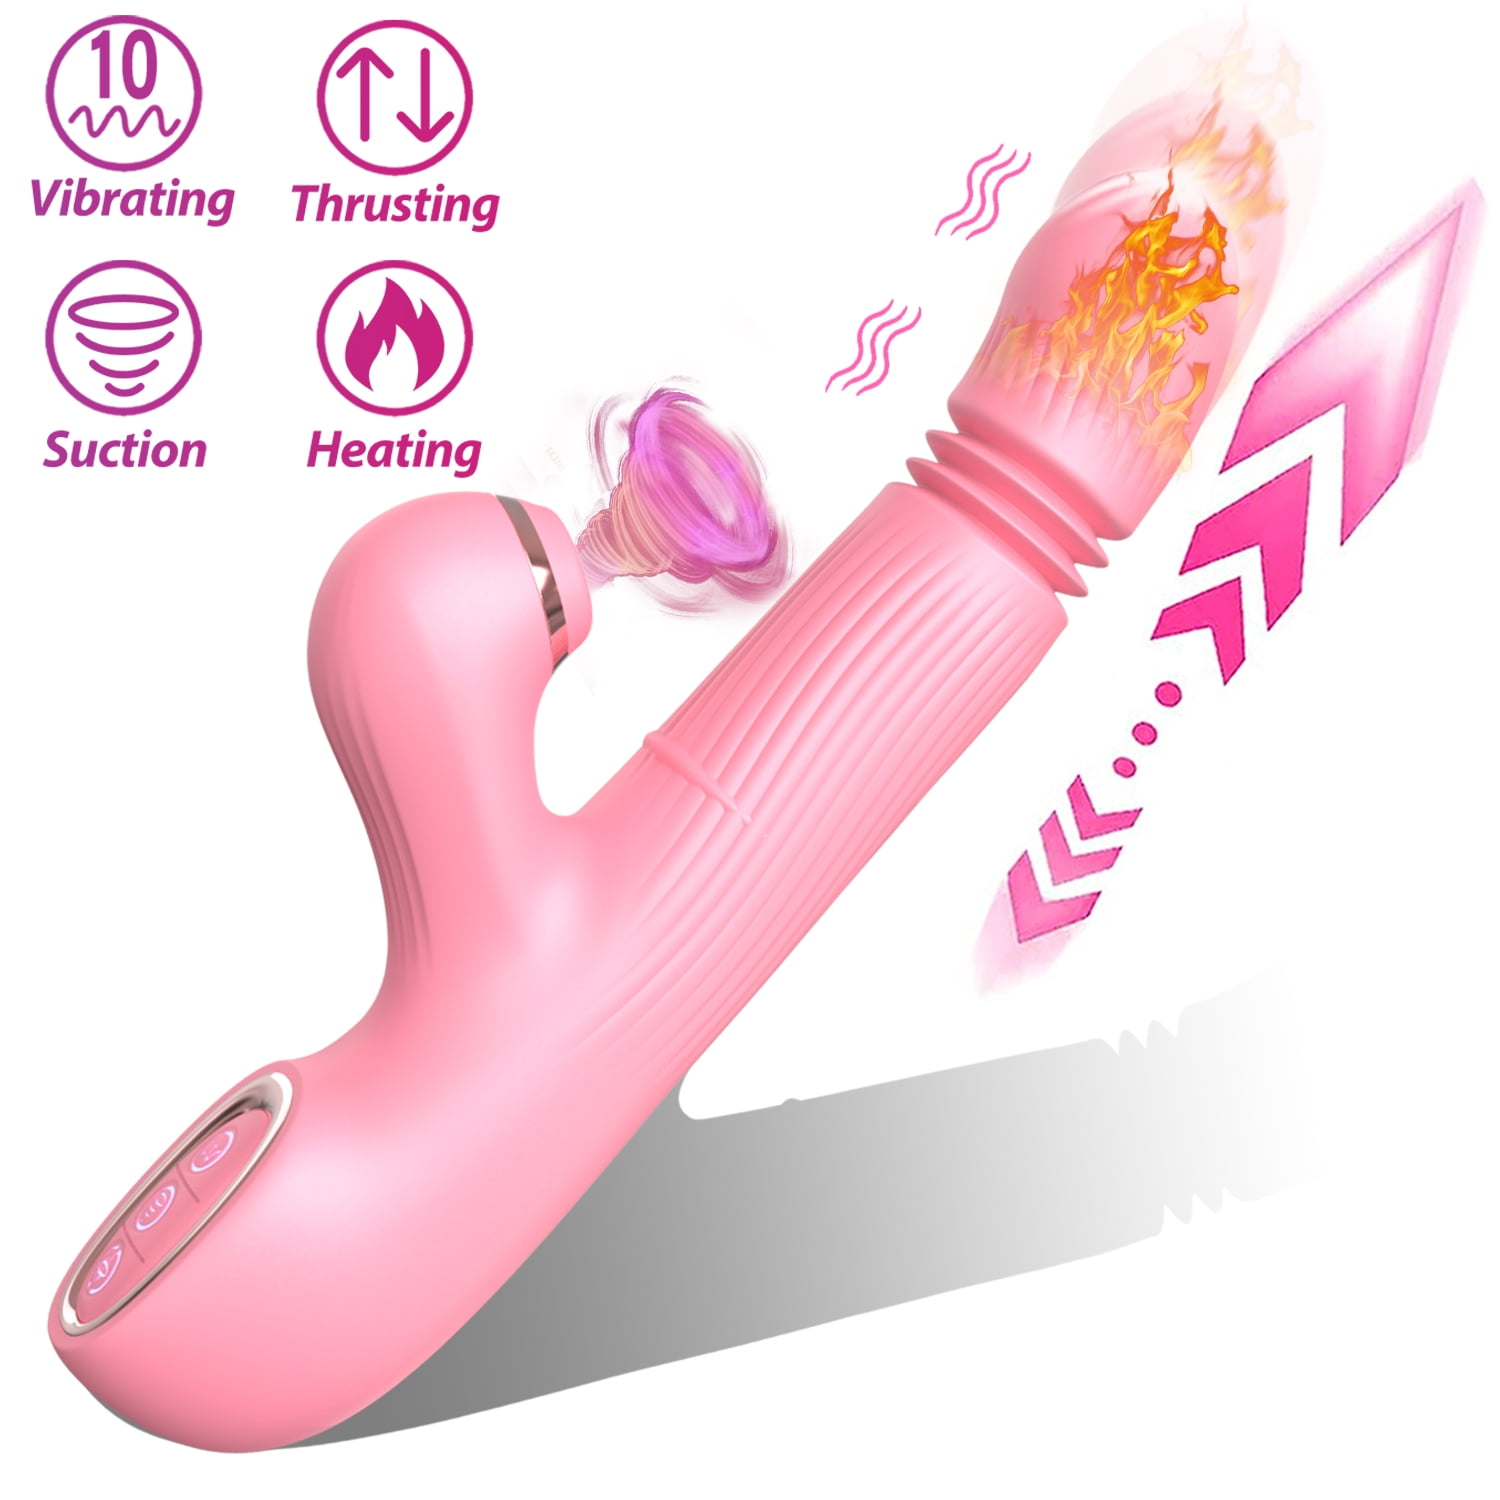 EXDOLL Thrusting Dildo Vibrator Adult Sensory Toys for Women, G Spot Clitoral Pulsating Tap Vibrator with Vibration and Pulsating Tap and Heating Function, Waterproof Sex Toy for Women or Couples